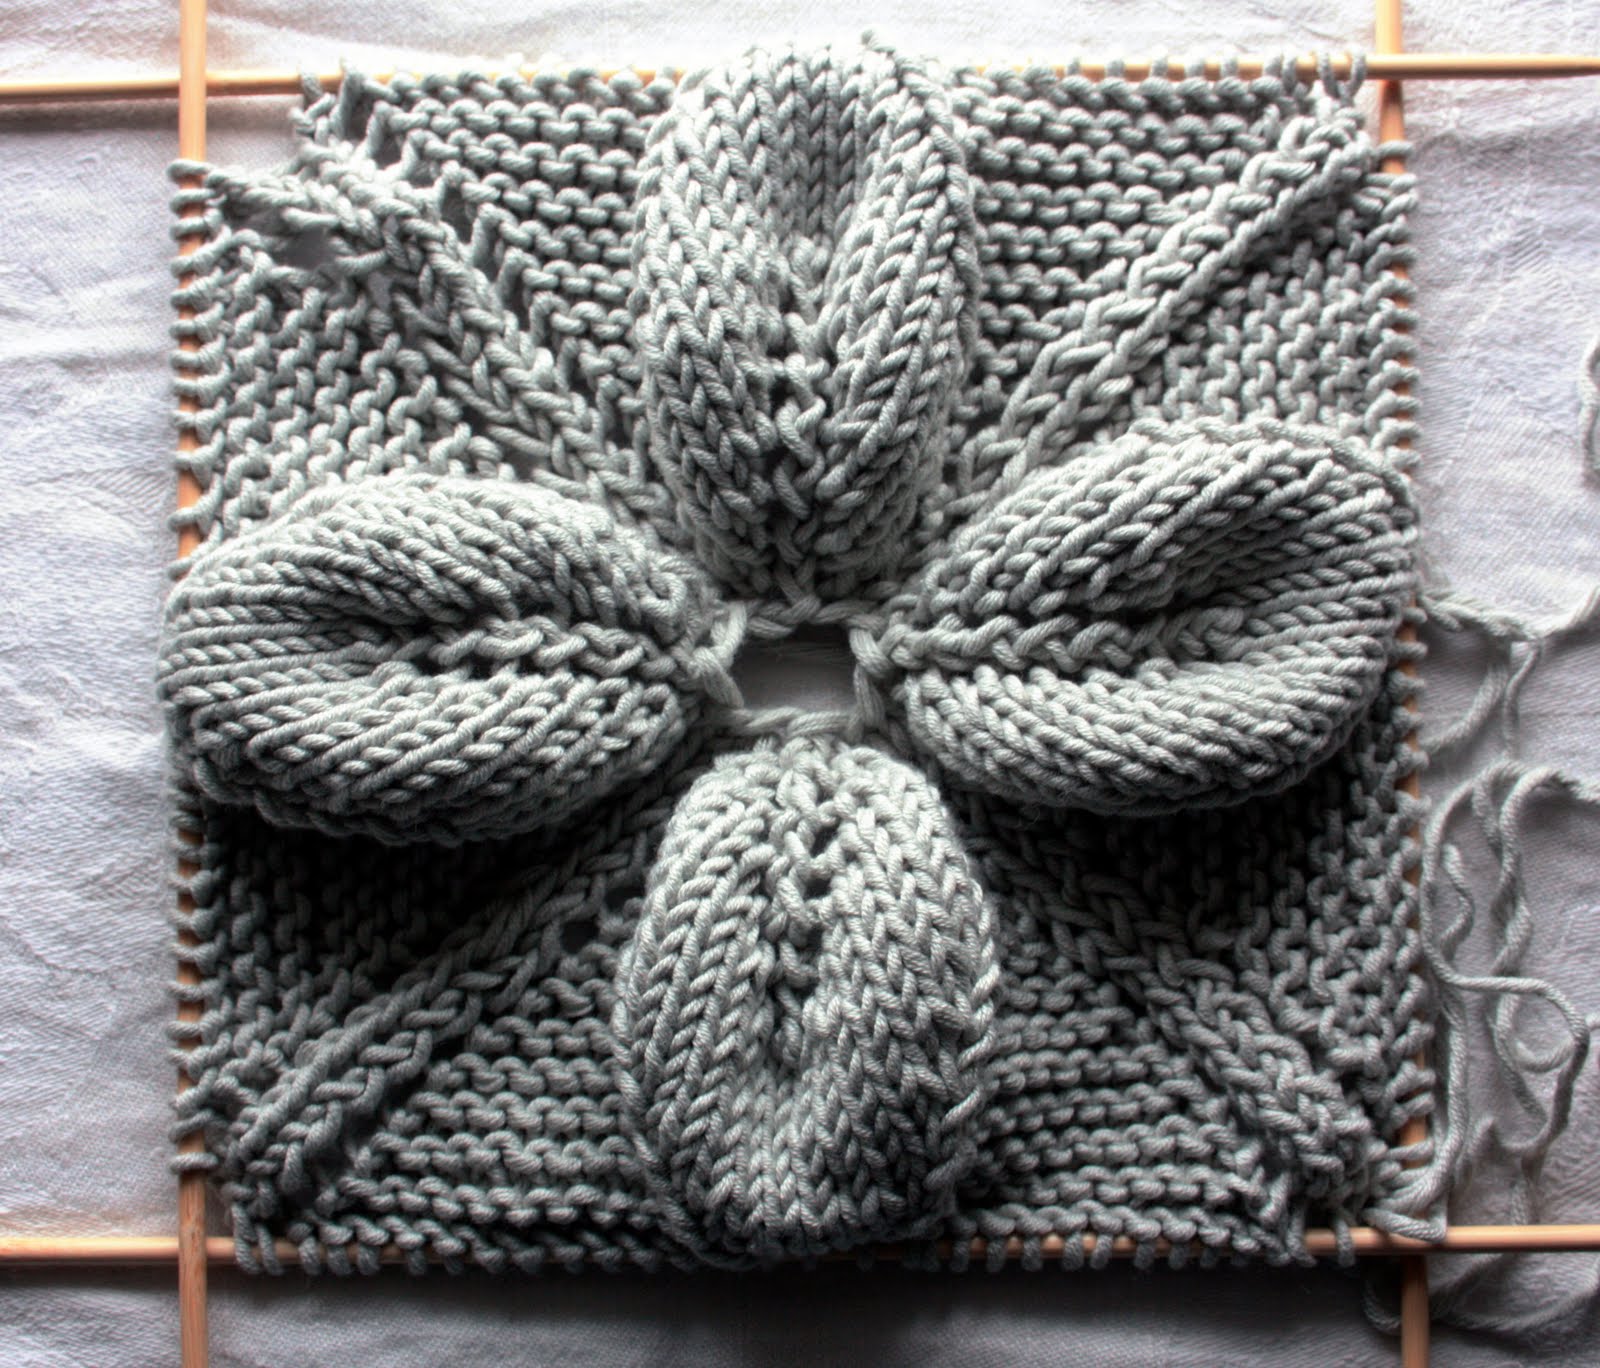 Needlework inspiration: Knitted leaf & lace squares